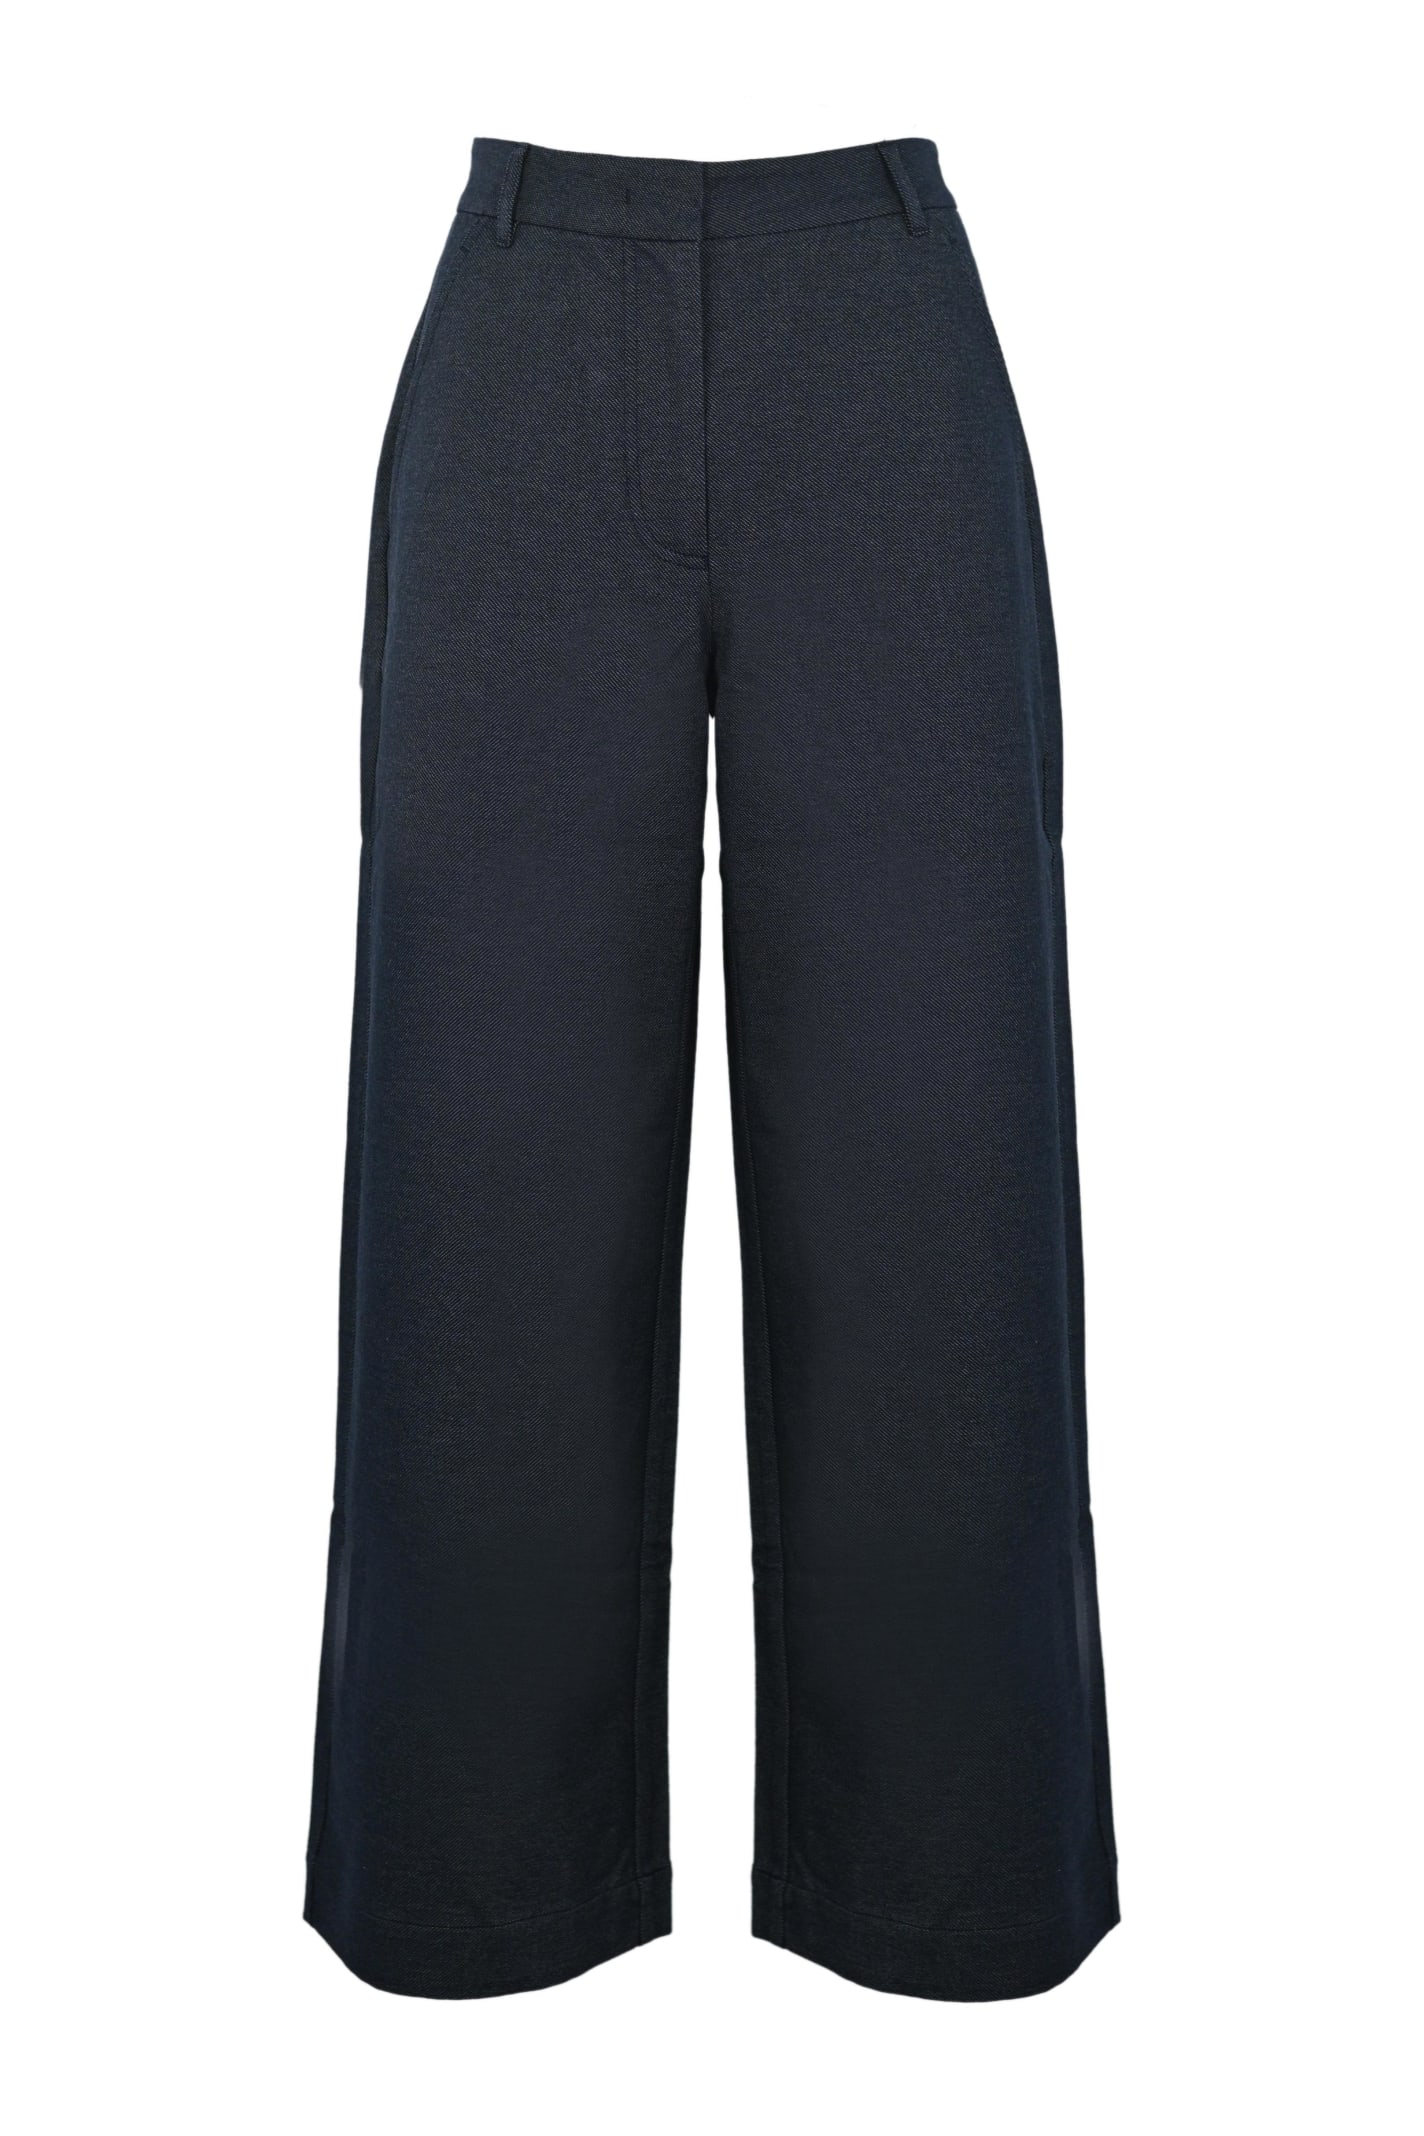 Weekend Max Mara Trousers Made Of Denim-effect Stretch Cotton Jersey